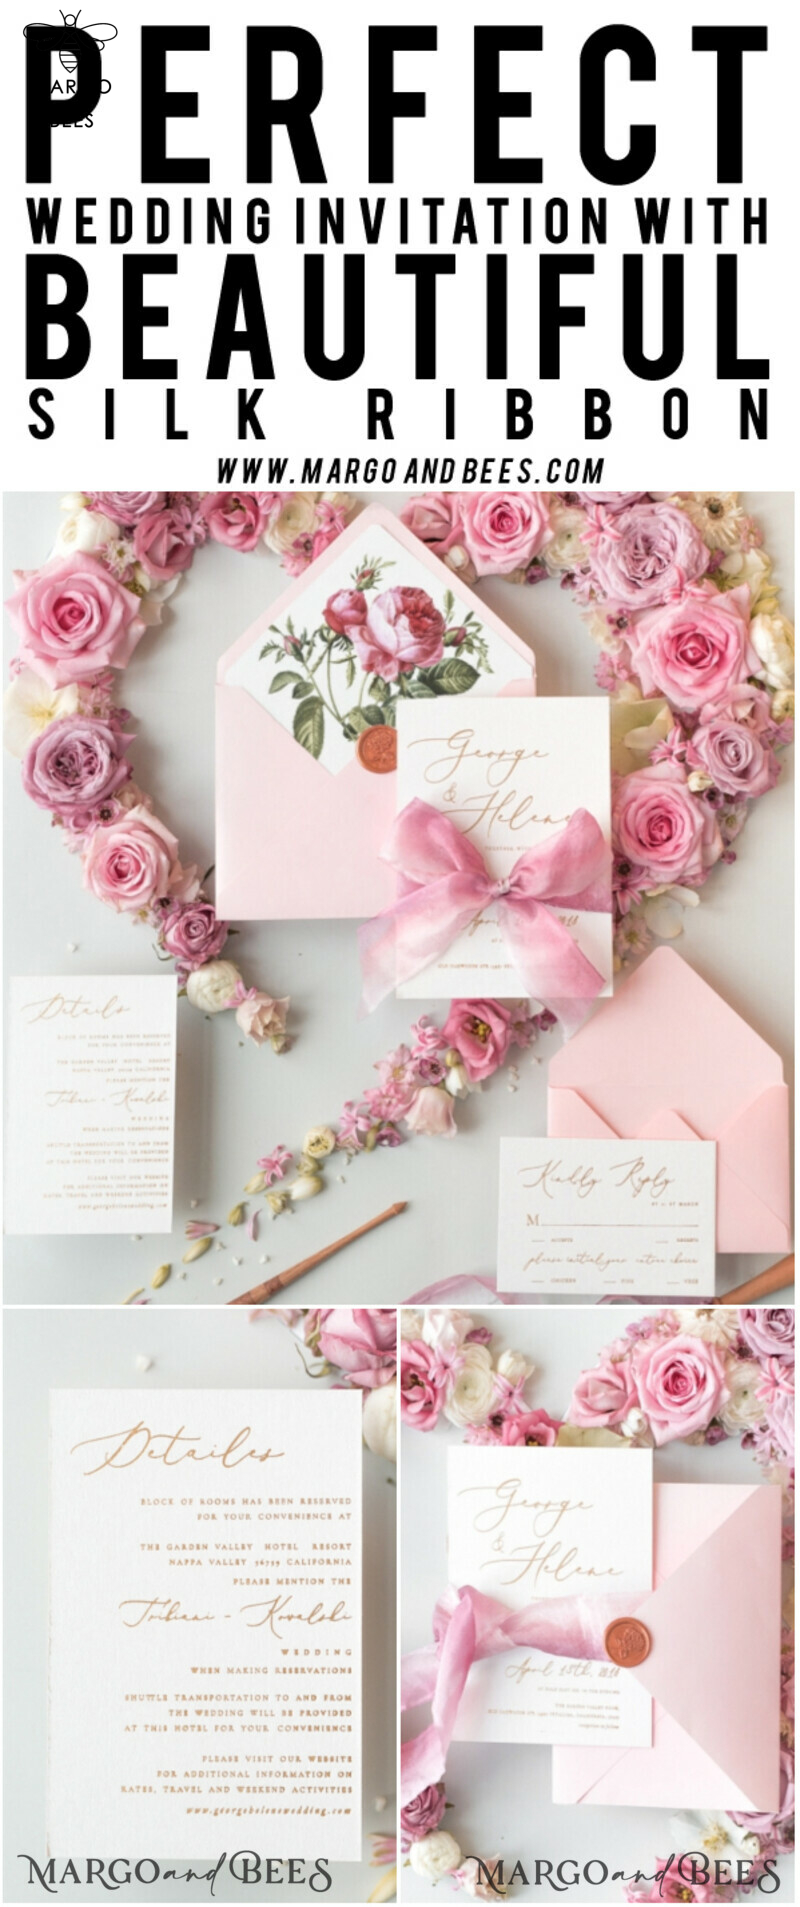 Romantic Blush Pink Wedding Invitations: Vintage Floral Wedding Invitation Suite with Elegant Wedding Cards and Hand Dyed Bow - Glamour Peony Wedding Stationery-42